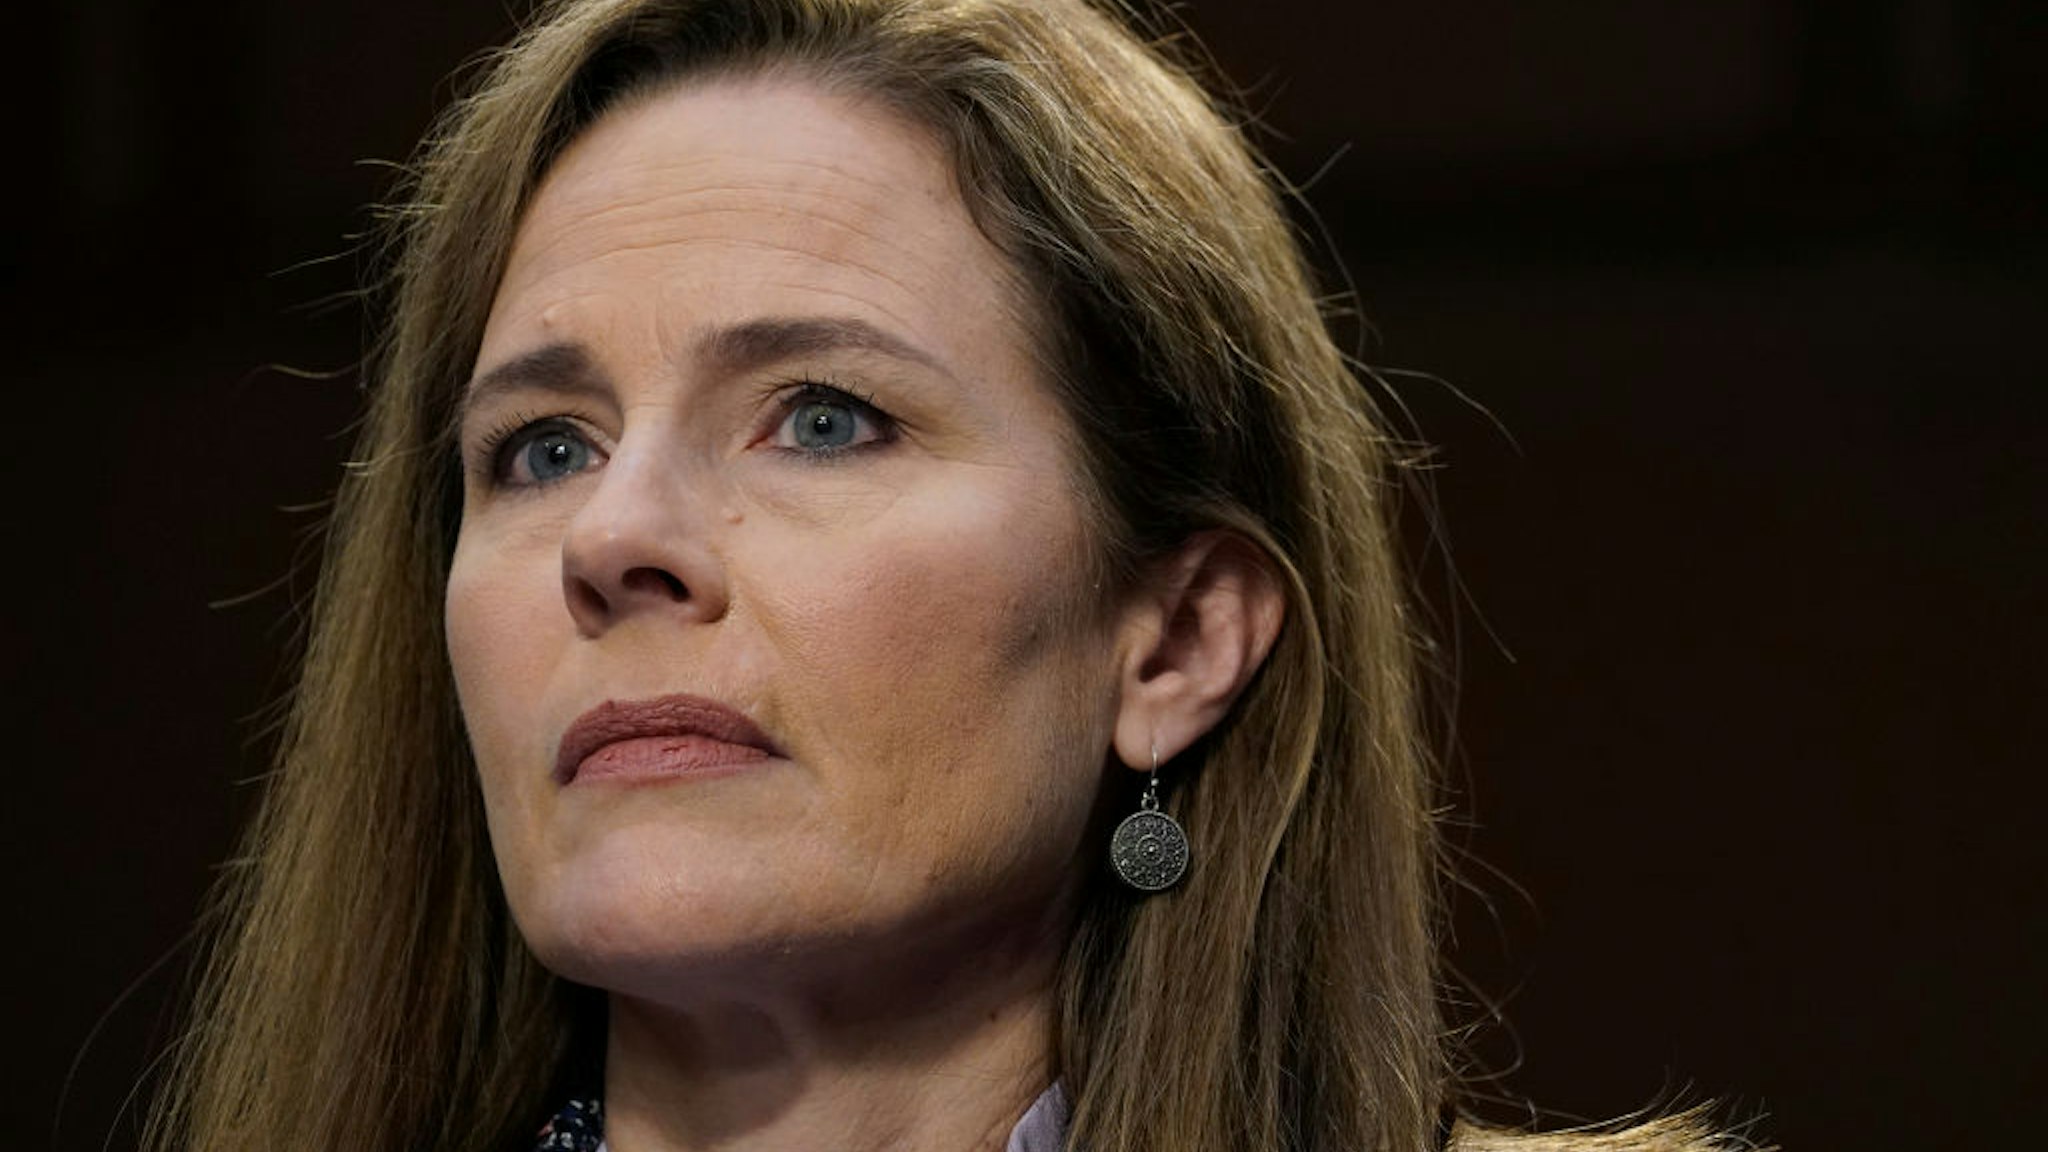 Supreme Court nominee Amy Coney Barrett participates in the third day of her Senate Judiciary Committee confirmation hearing on Capitol Hill on October 14, 2020 in Washington, DC.